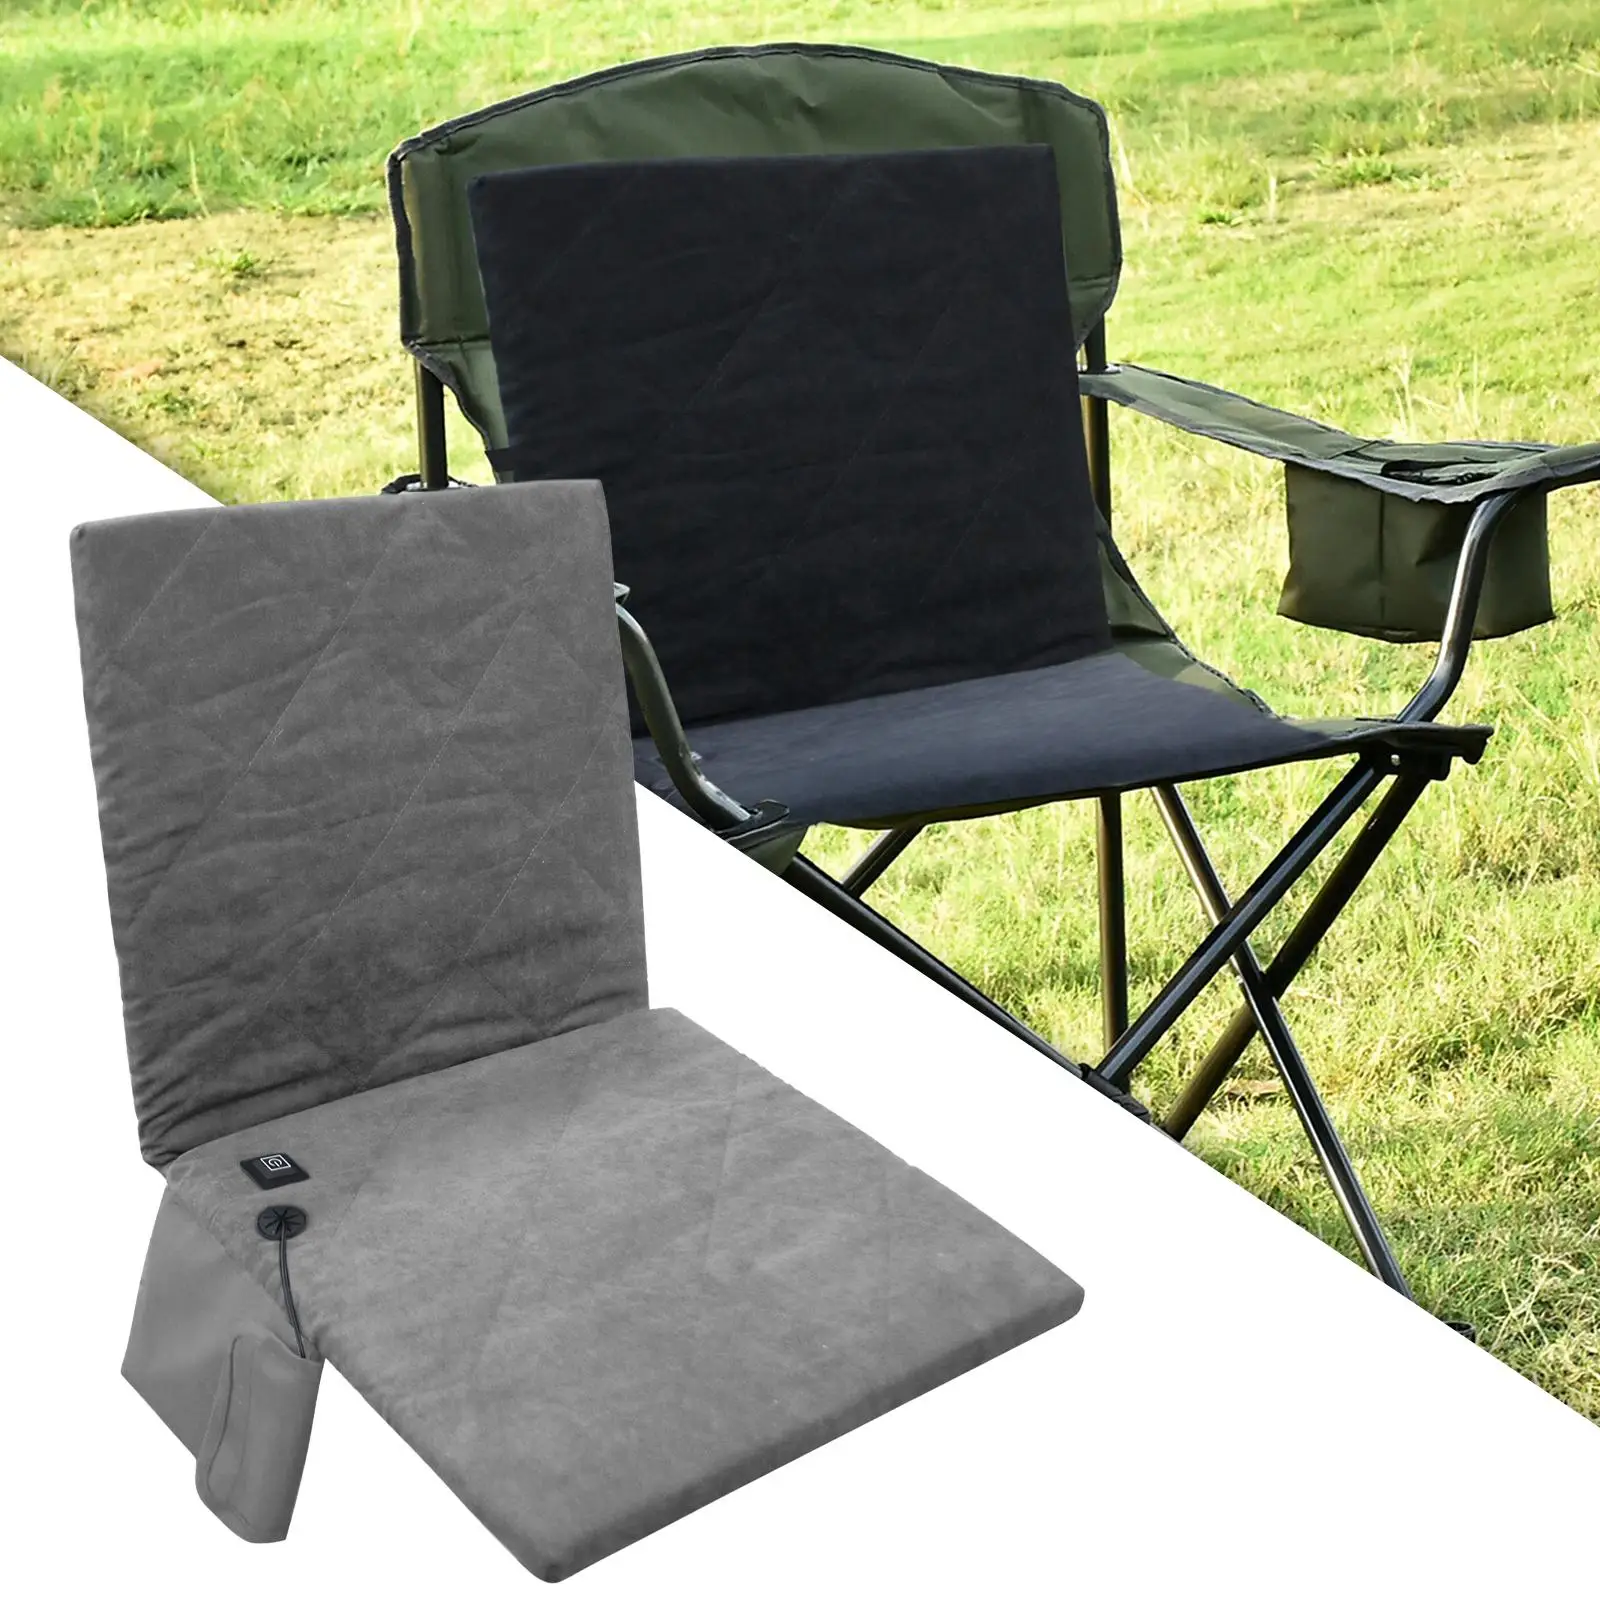 Heated Seat Cushion for Outdoor Indoor Cushion Portable Soft for Patio Lawn